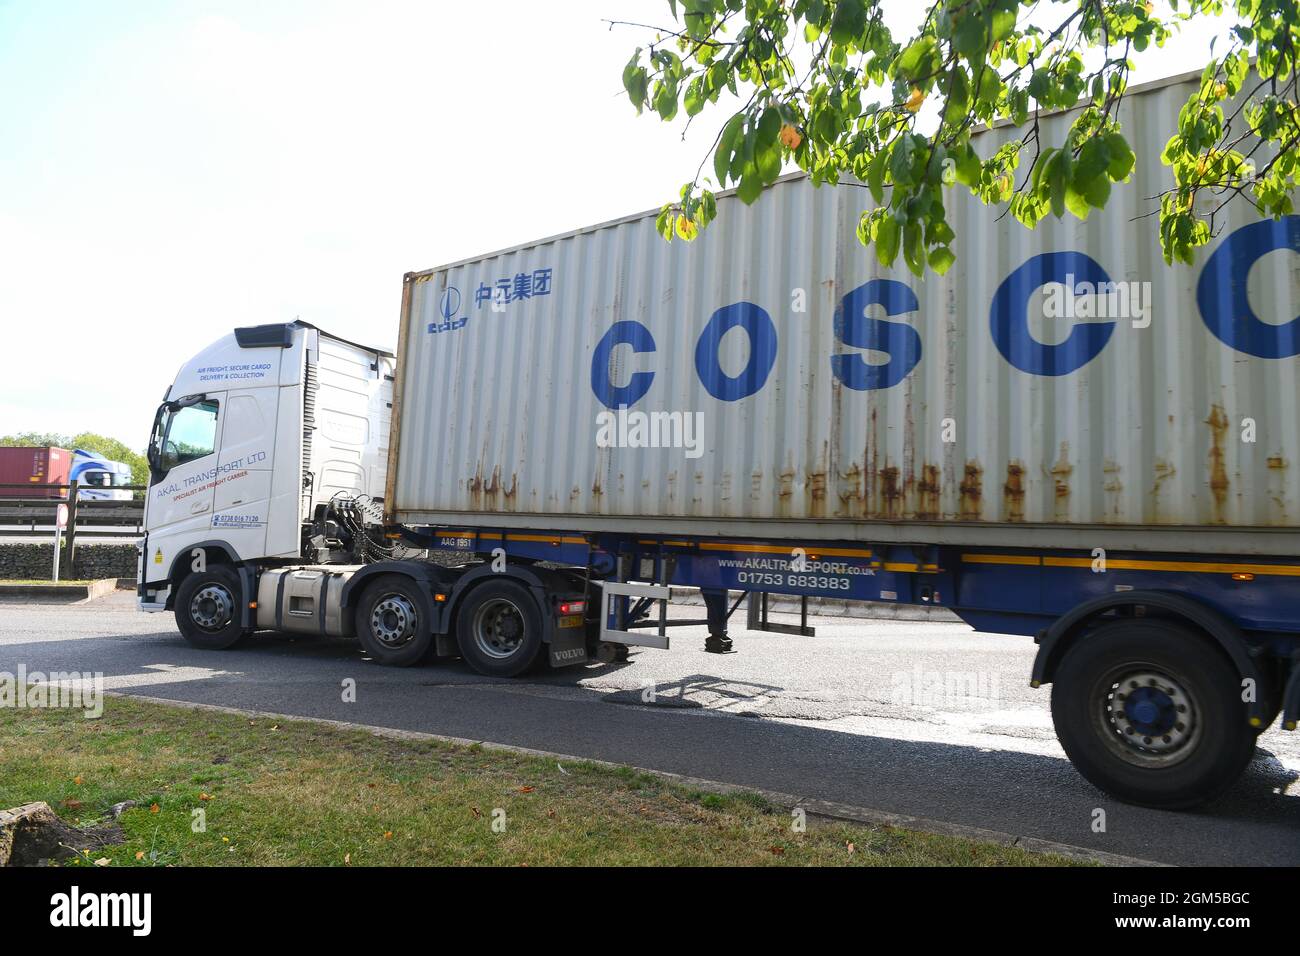 A cosco container truck leaves Rownhams service station near Southampton UK  to continue its journey on the M27 after a driver break Stock Photo